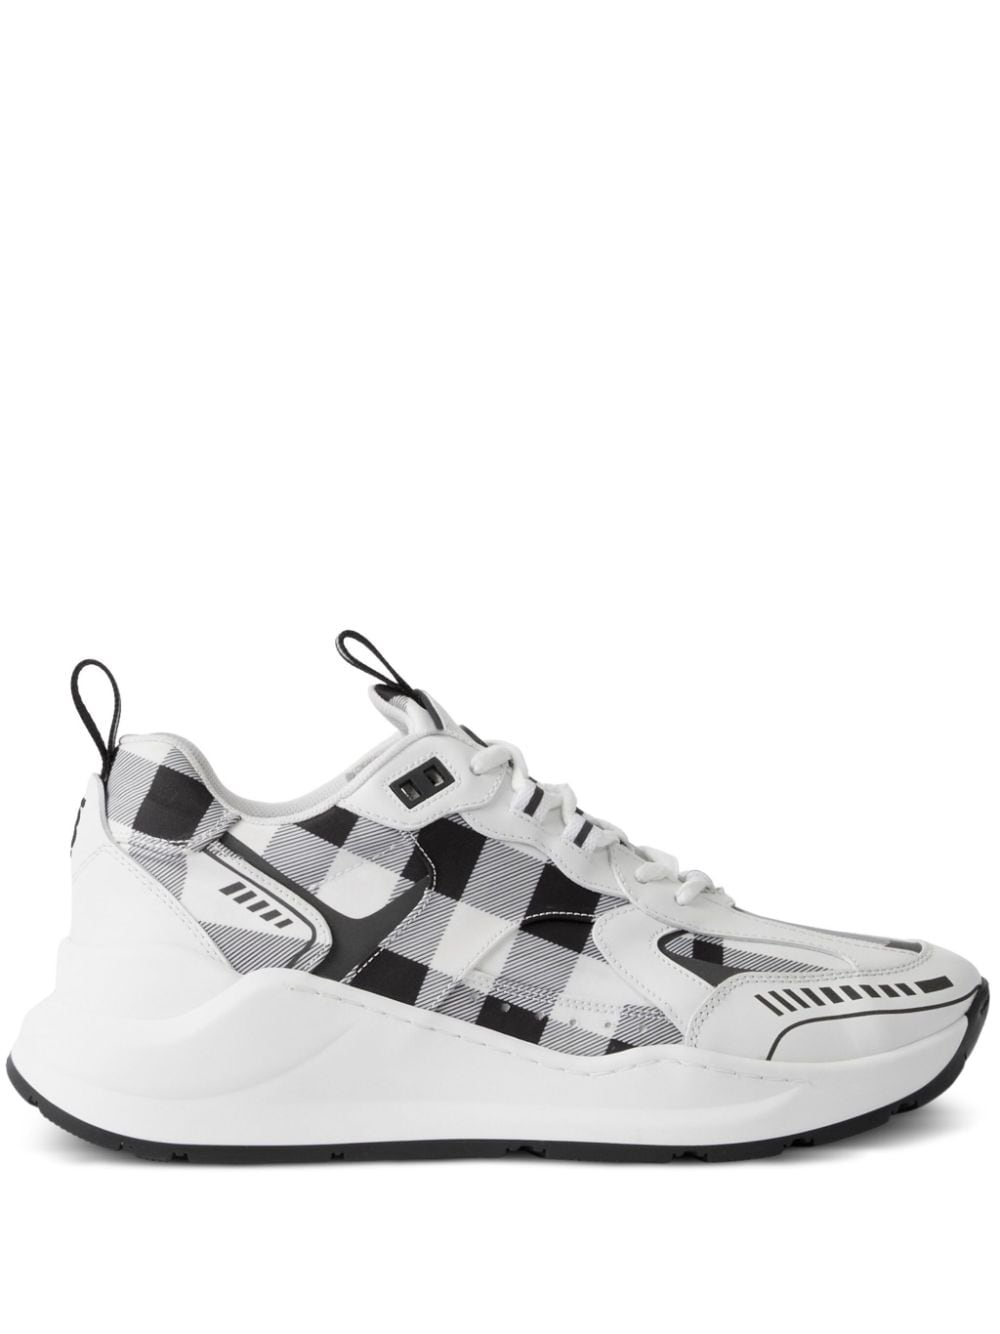 Burberry check-pattern leather sneakers - White von Burberry